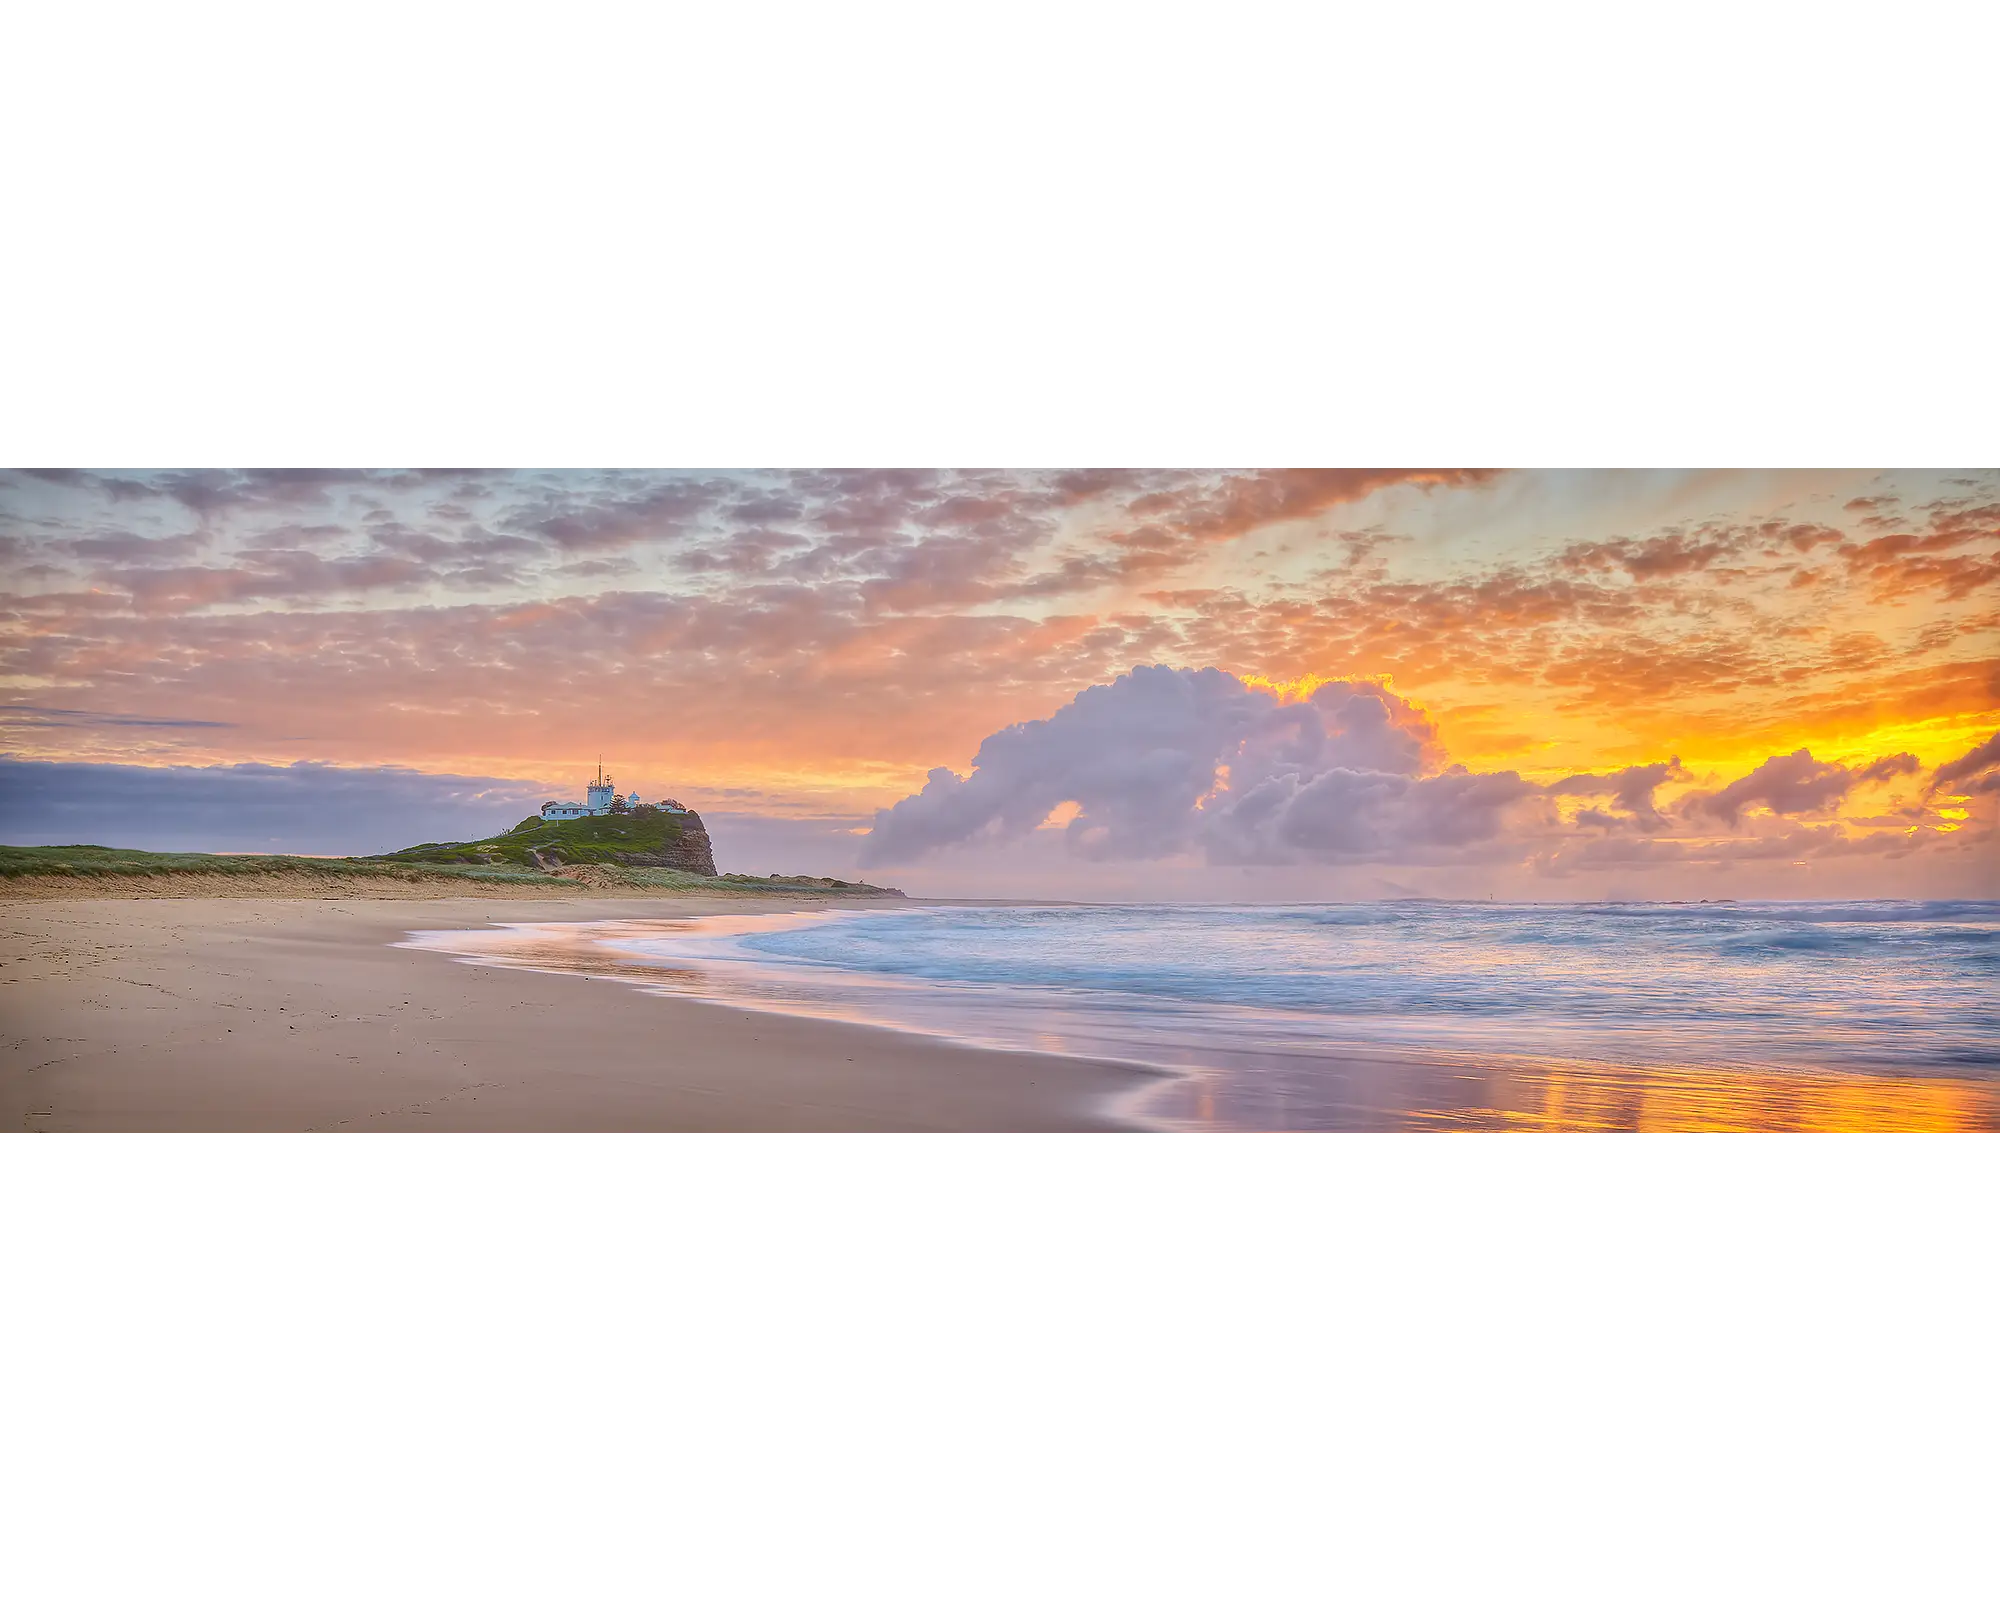 Nobbys Beach - Sunrise with clouds, Newcastle, New South Wales, Australia.